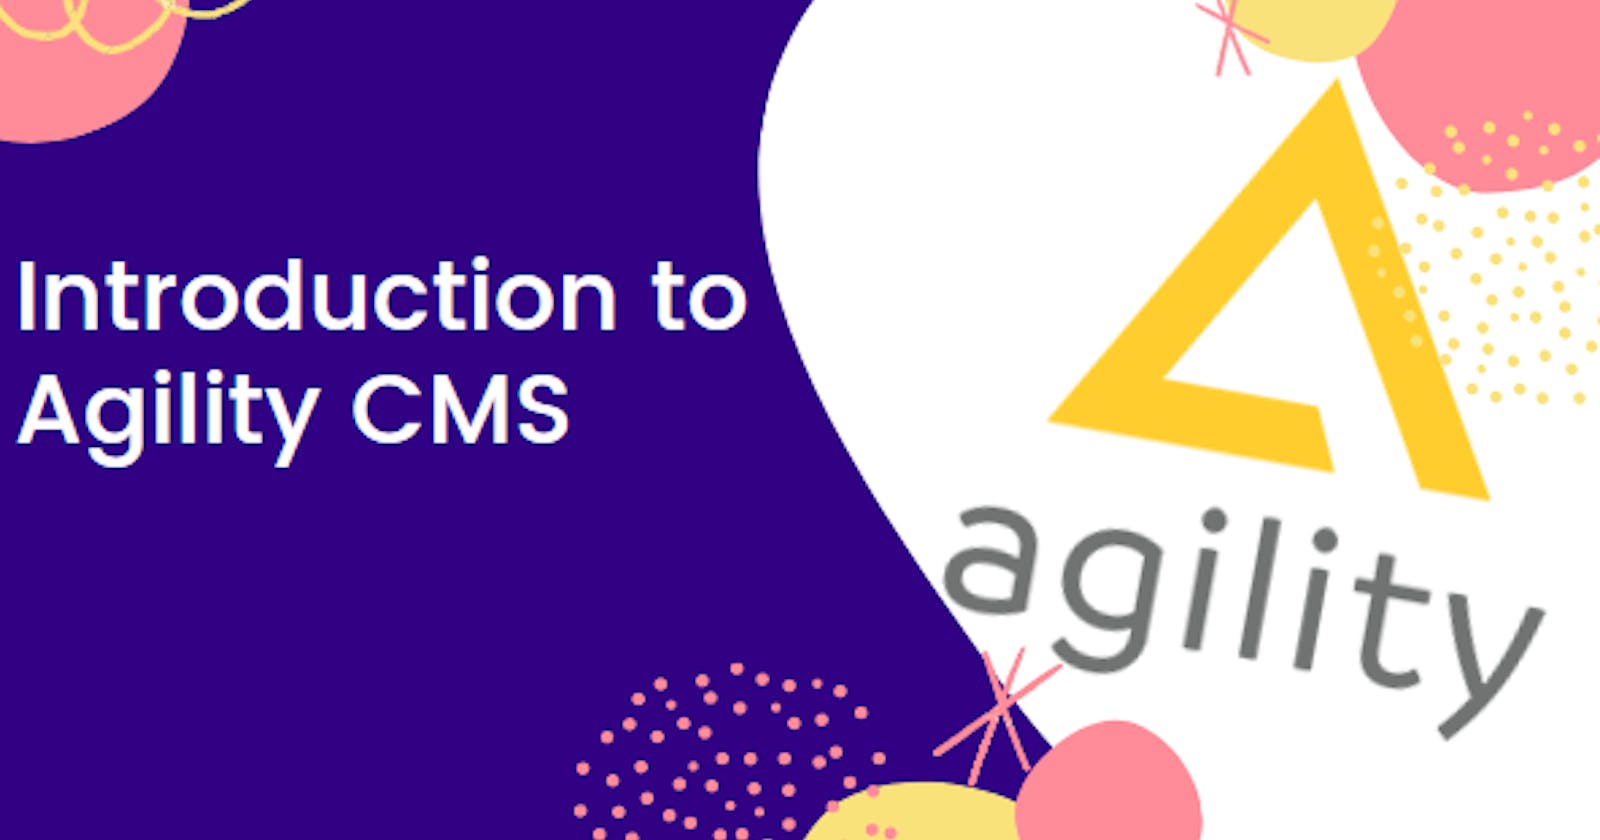 Introduction to Agility CMS